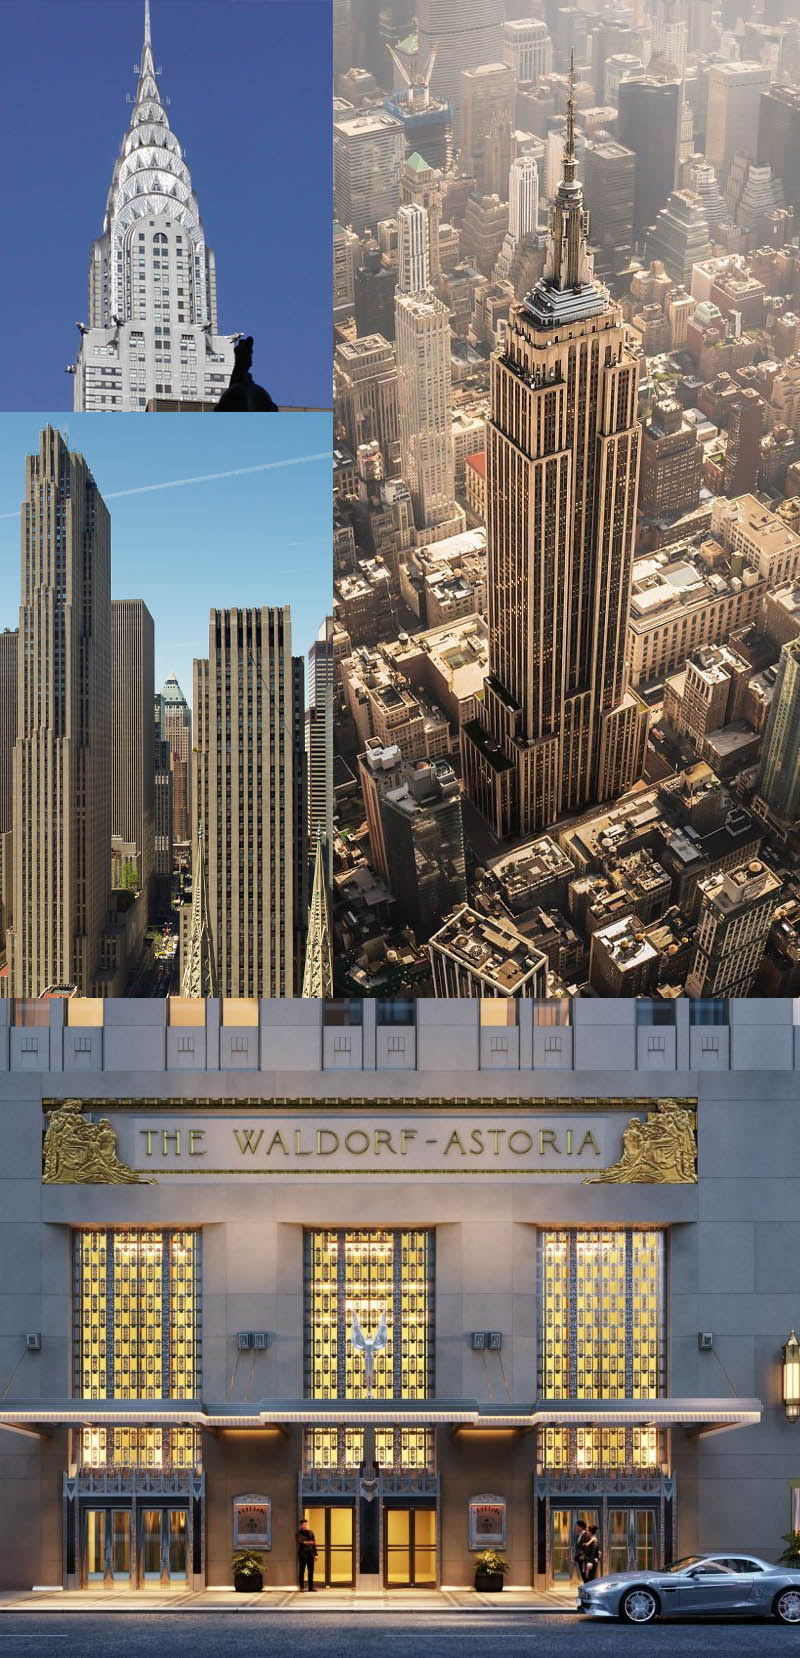 Famous American art deco skyscrapers: the Empire State Building, Chrysler Building, Rockefeller Center, and Waldorf Astoria Hotel. 